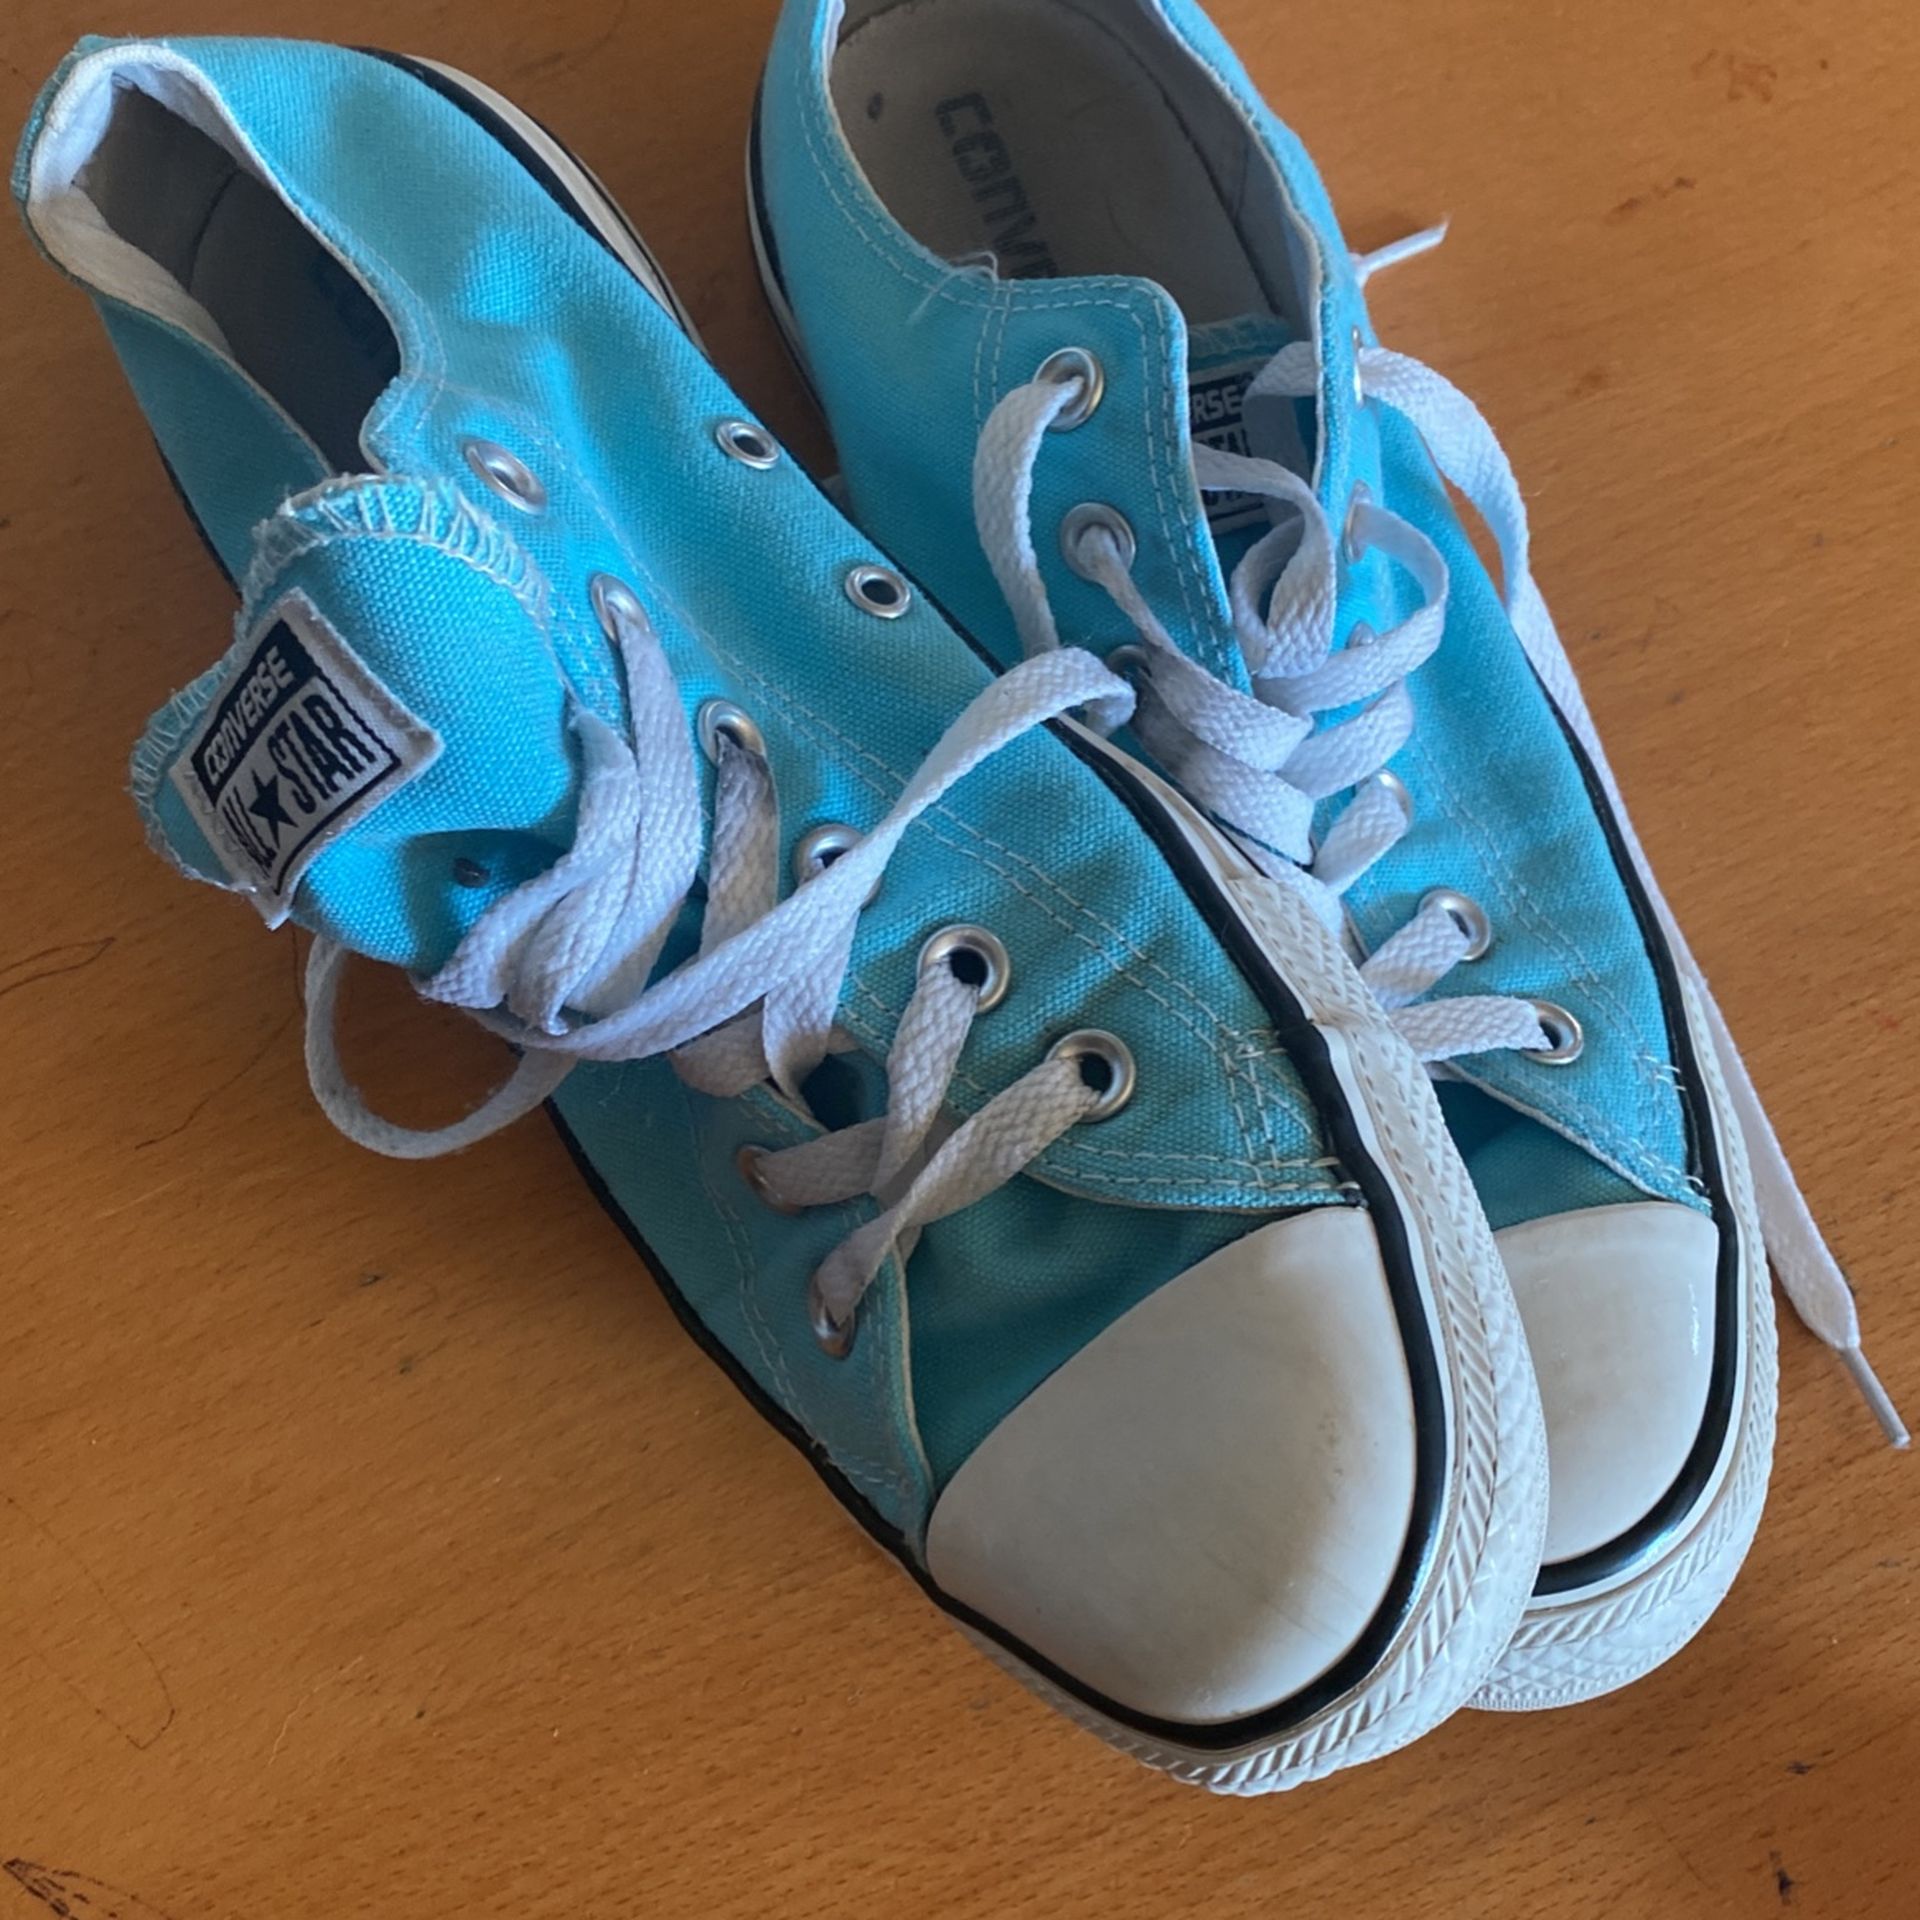 Converse Tennis Shoes Unisex Women Size 9 and Men Size 7 Great Condition 